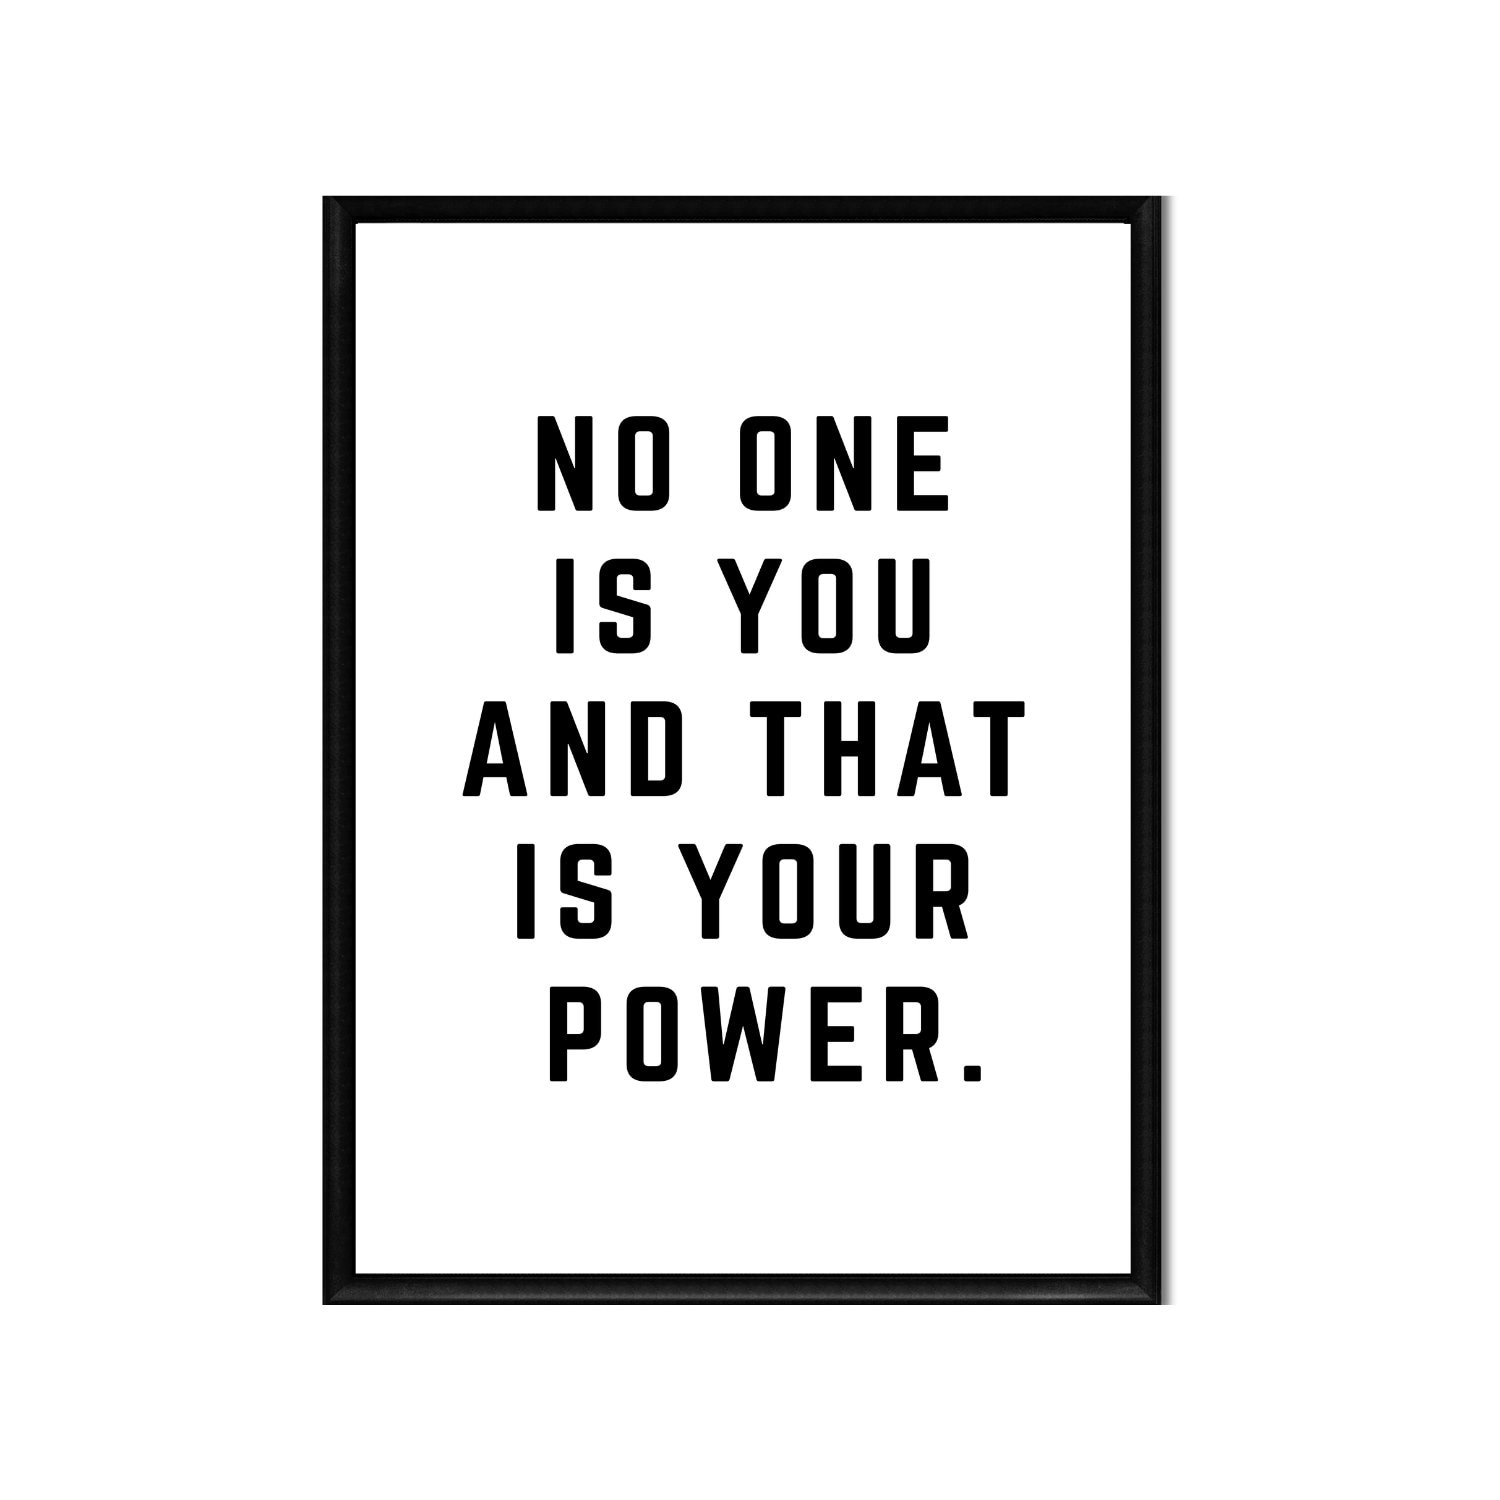 No one is you and that is your super power - hand drawn quotes  illustration. Funny humor. Life sayings. Art Print by The Life Quotes